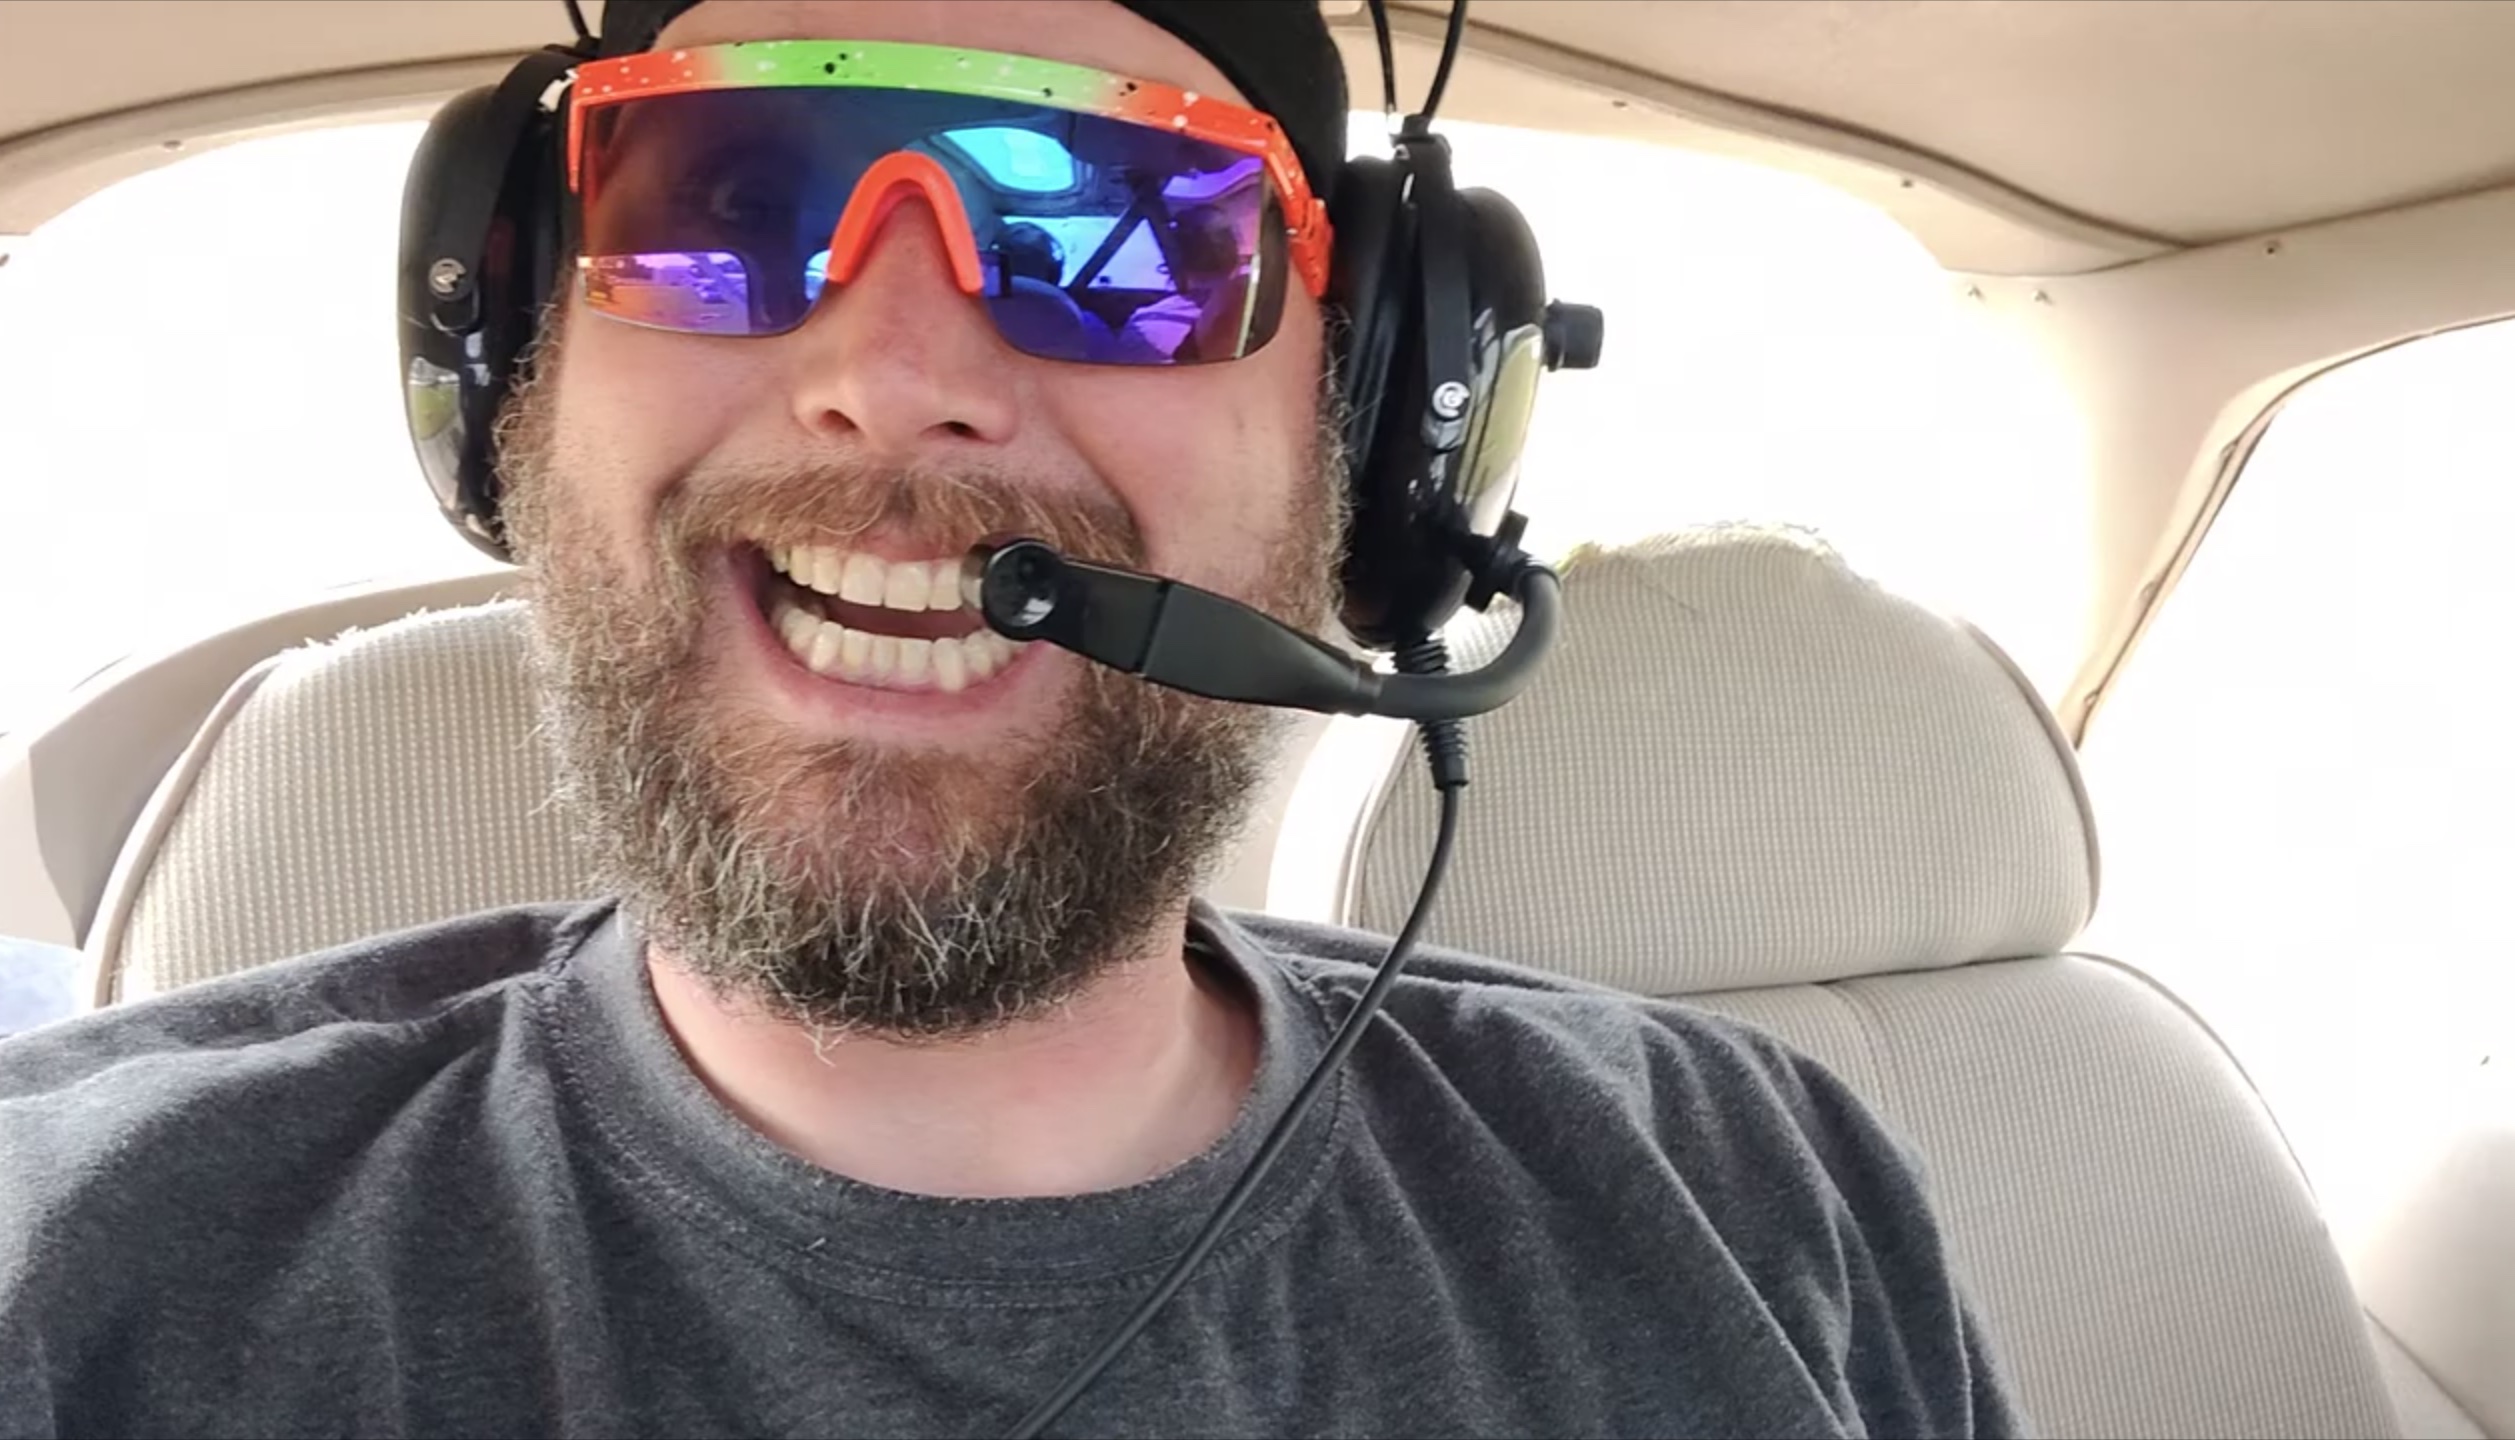 Jake smiling as he shares a unique flying experience with his family.